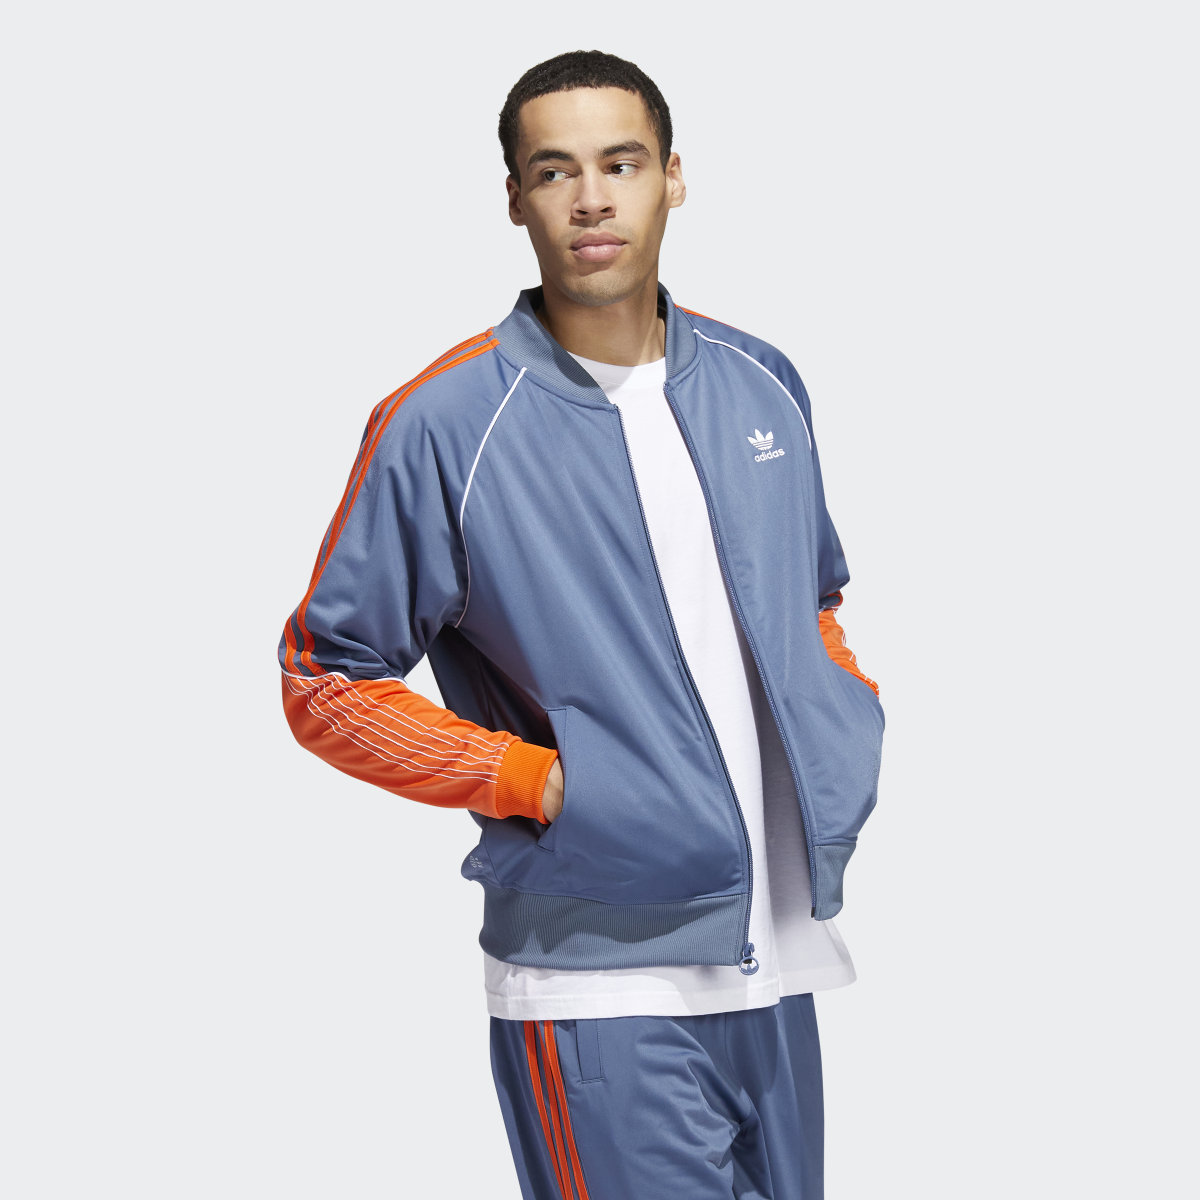 Adidas Tricot SST Track Top. 4